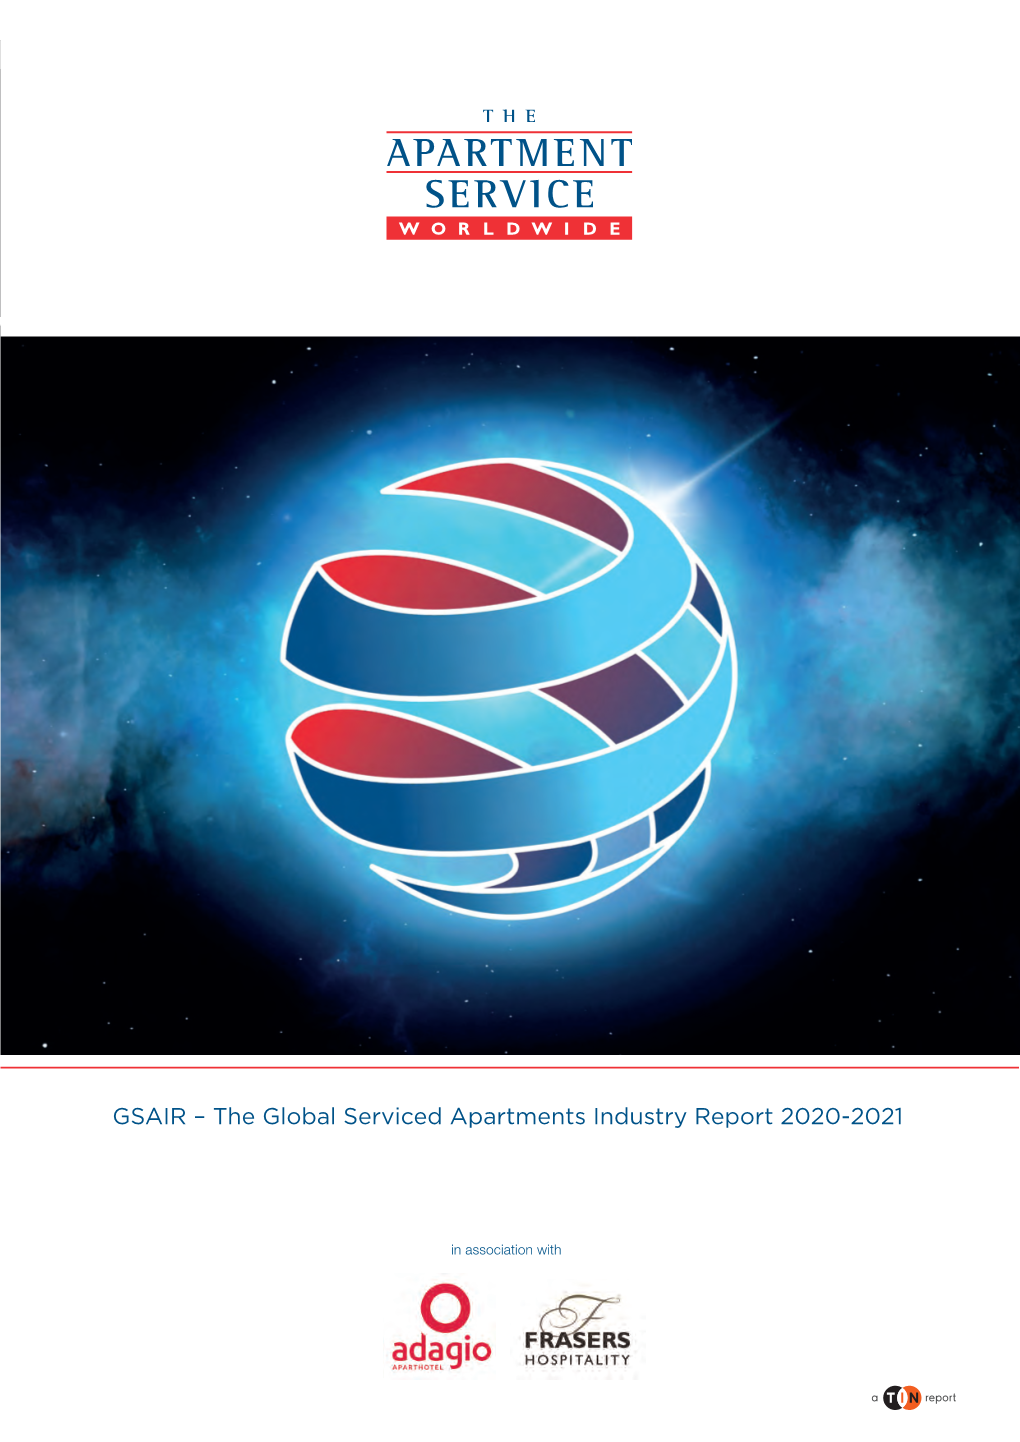 2020-2021 Global Serviced Apartments Industry Report